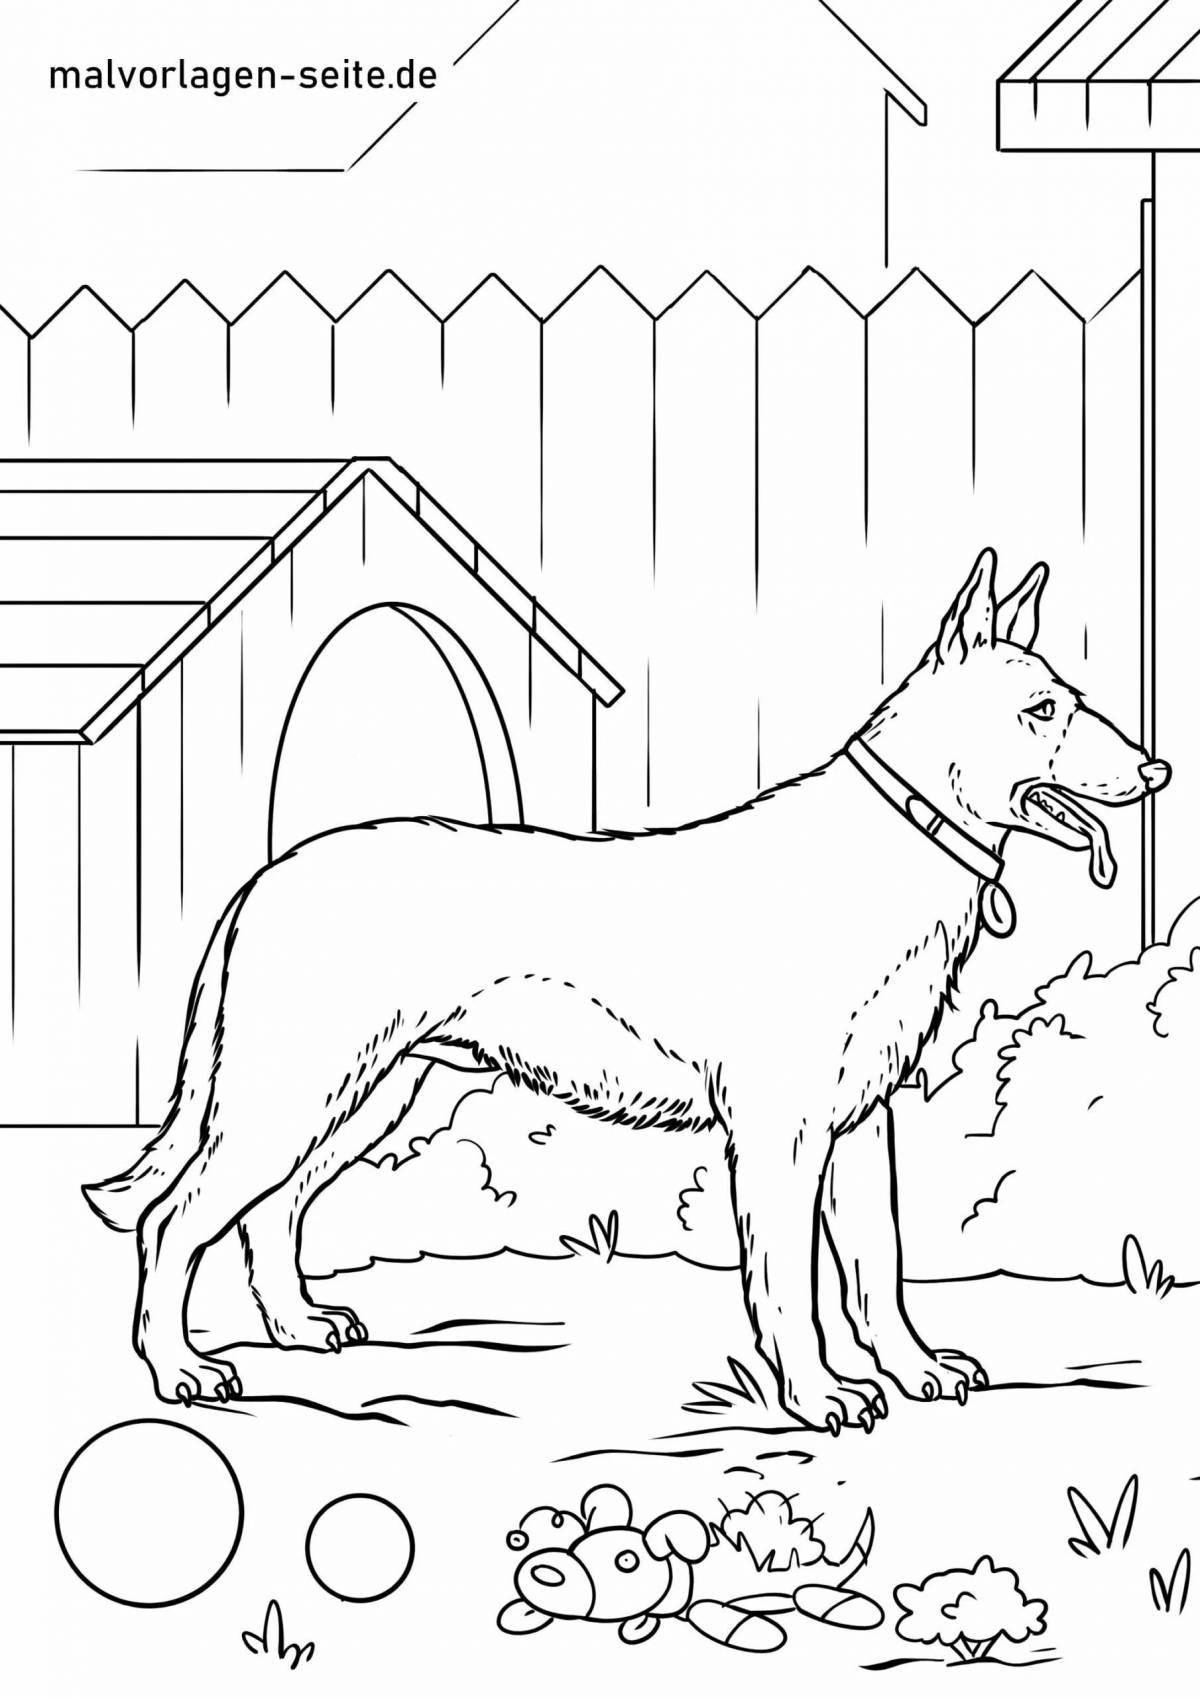 Funny coloring book of a german shepherd for children